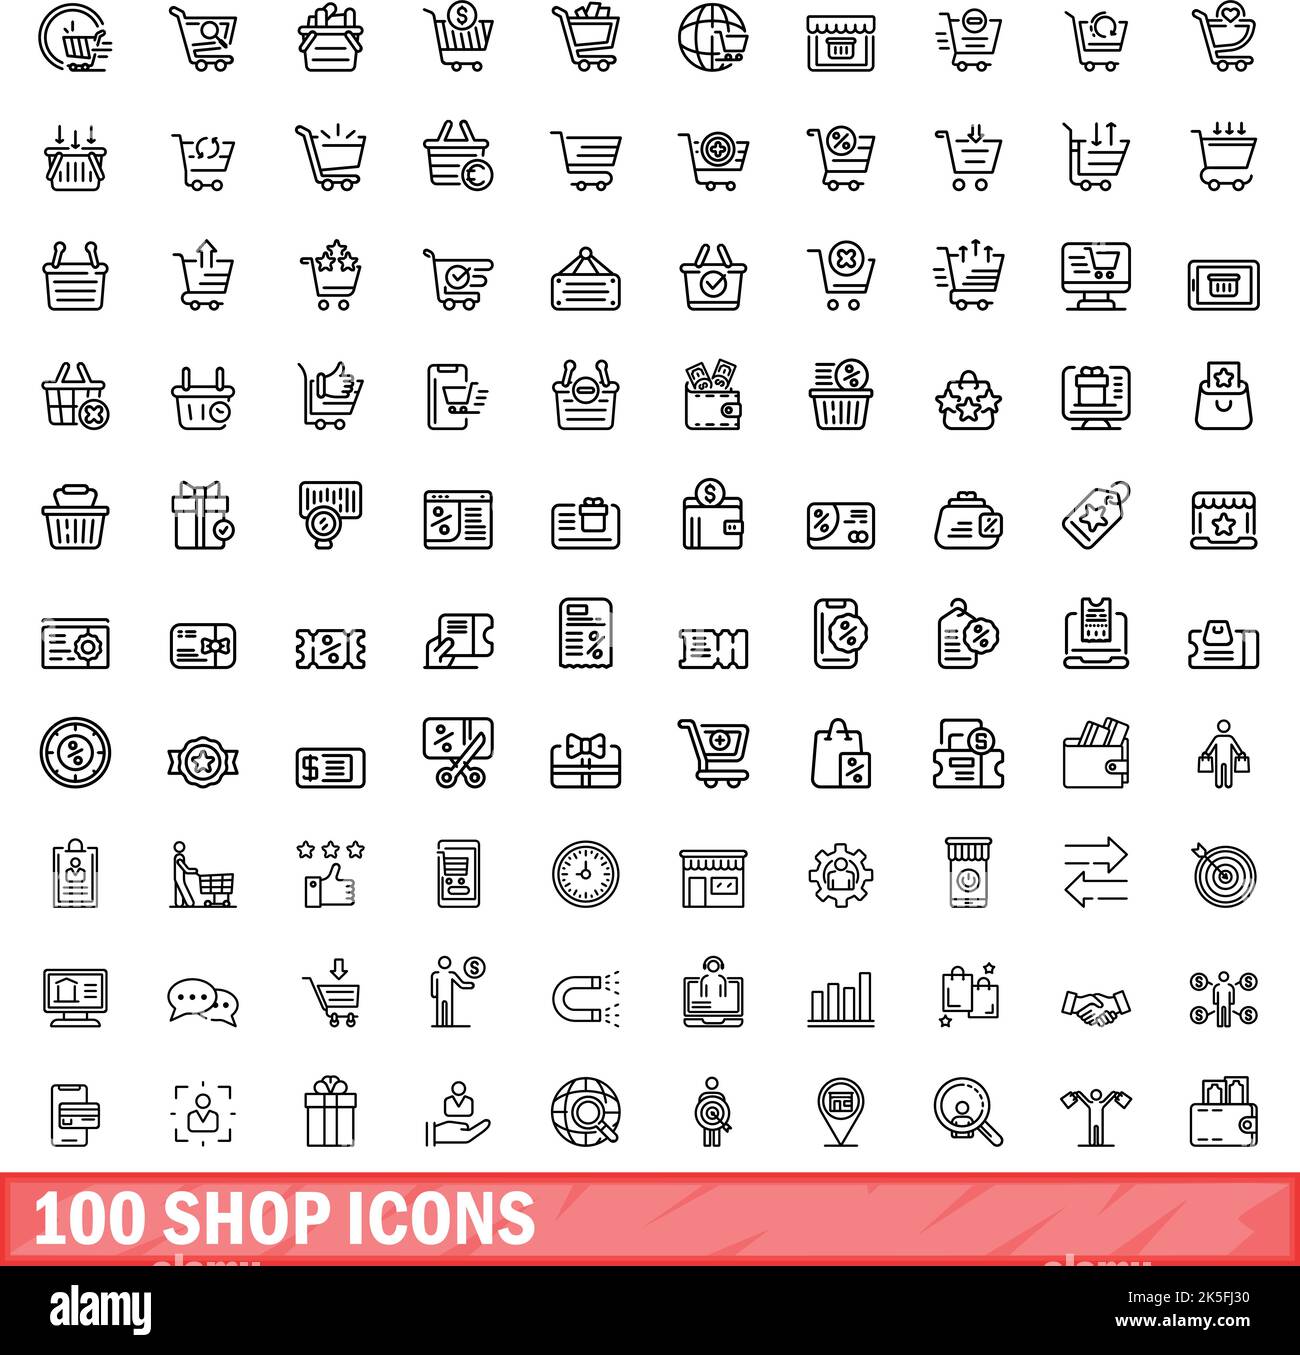 100 shop icons set. Outline illustration of 100 shop icons vector set isolated on white background Stock Vector